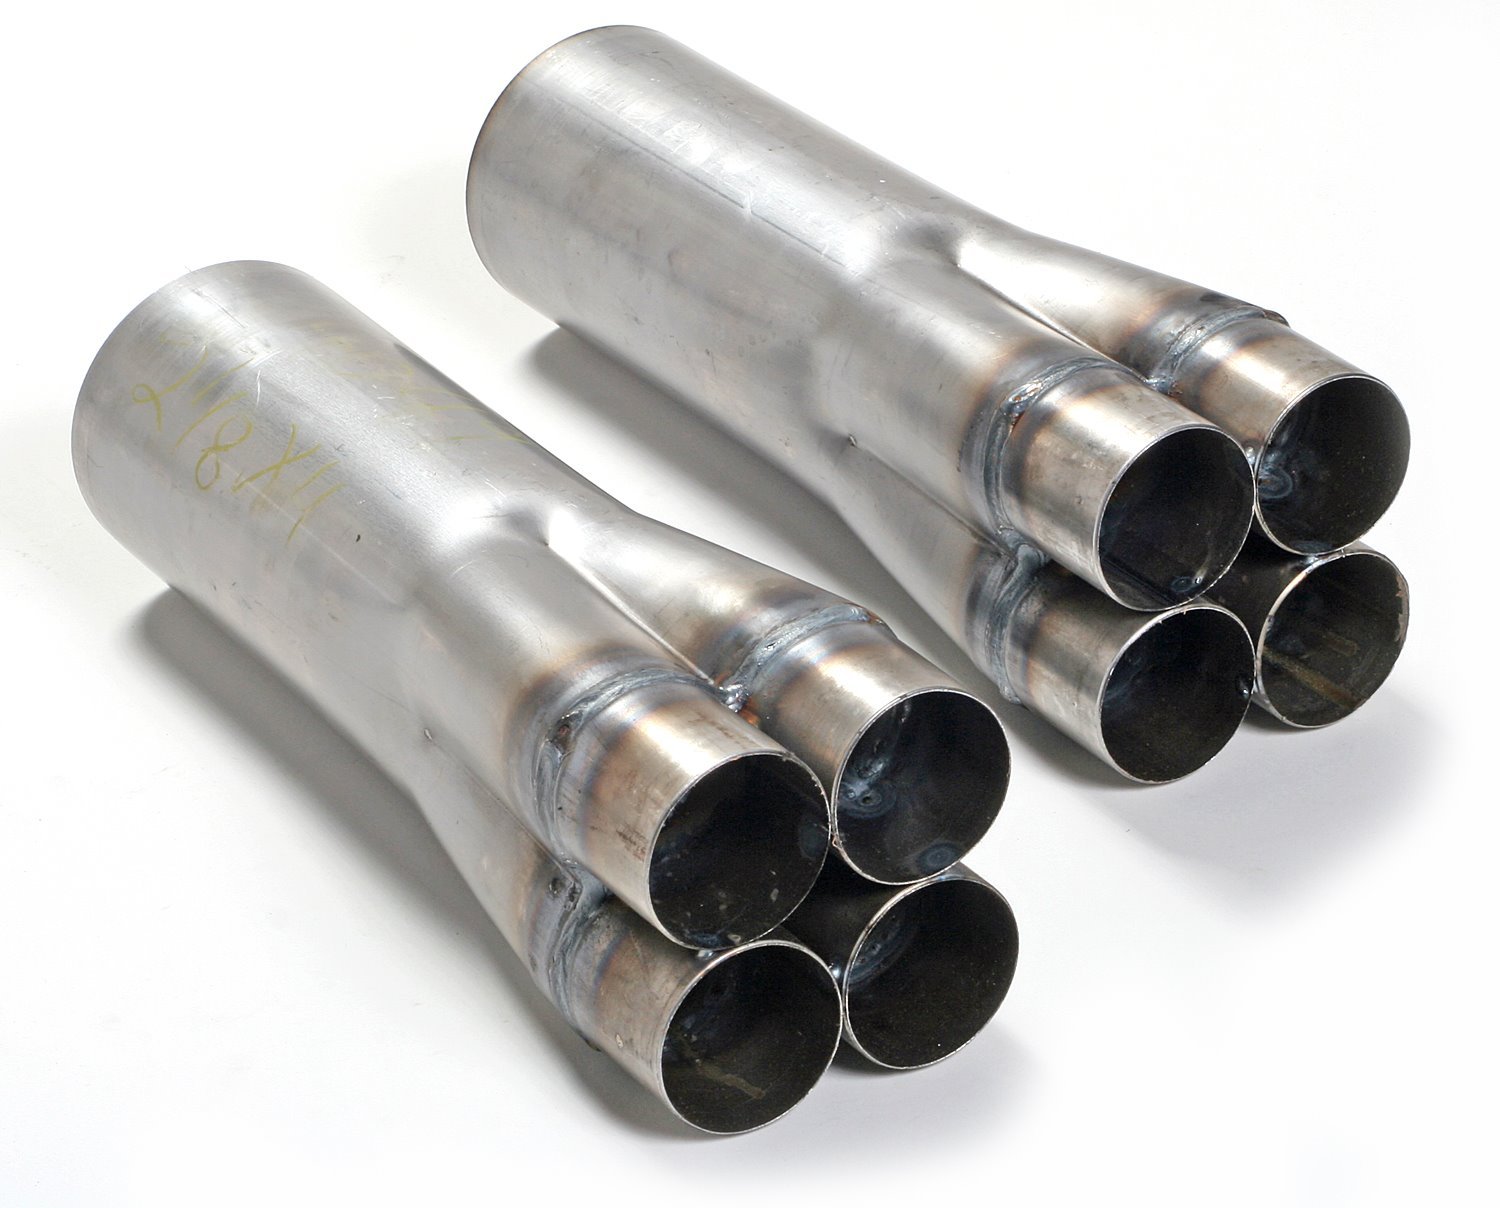 Slip-On Collector Tube Size: 2-1/4"